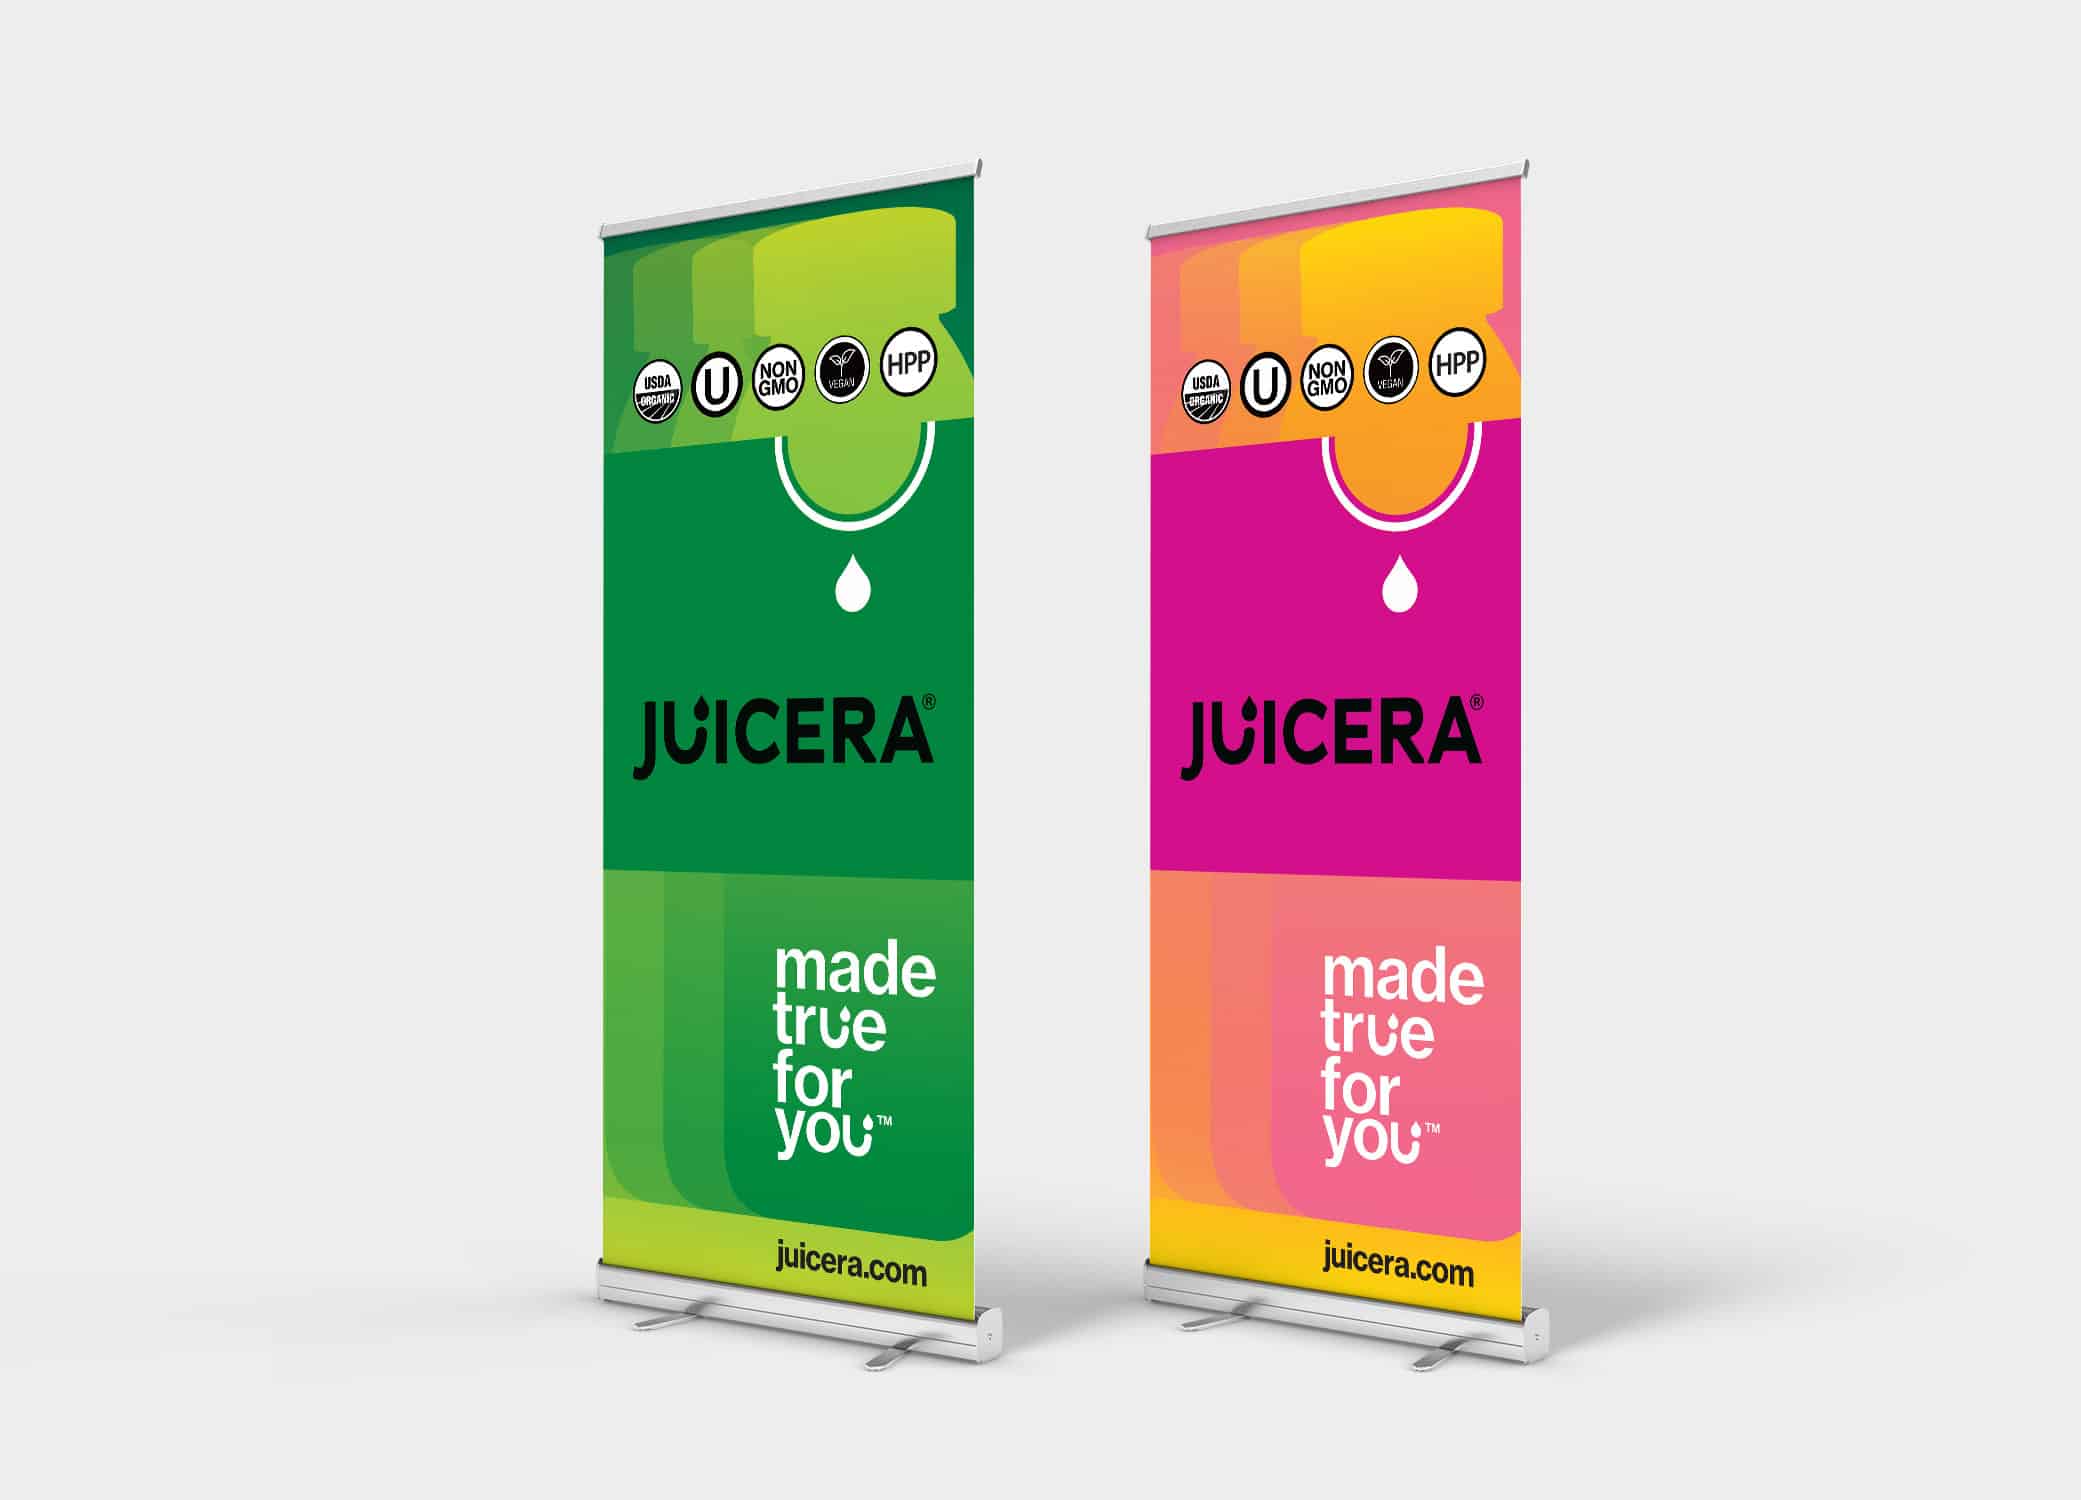 Juicera bright pink and green banners arranged next to each other against grey backdrop.